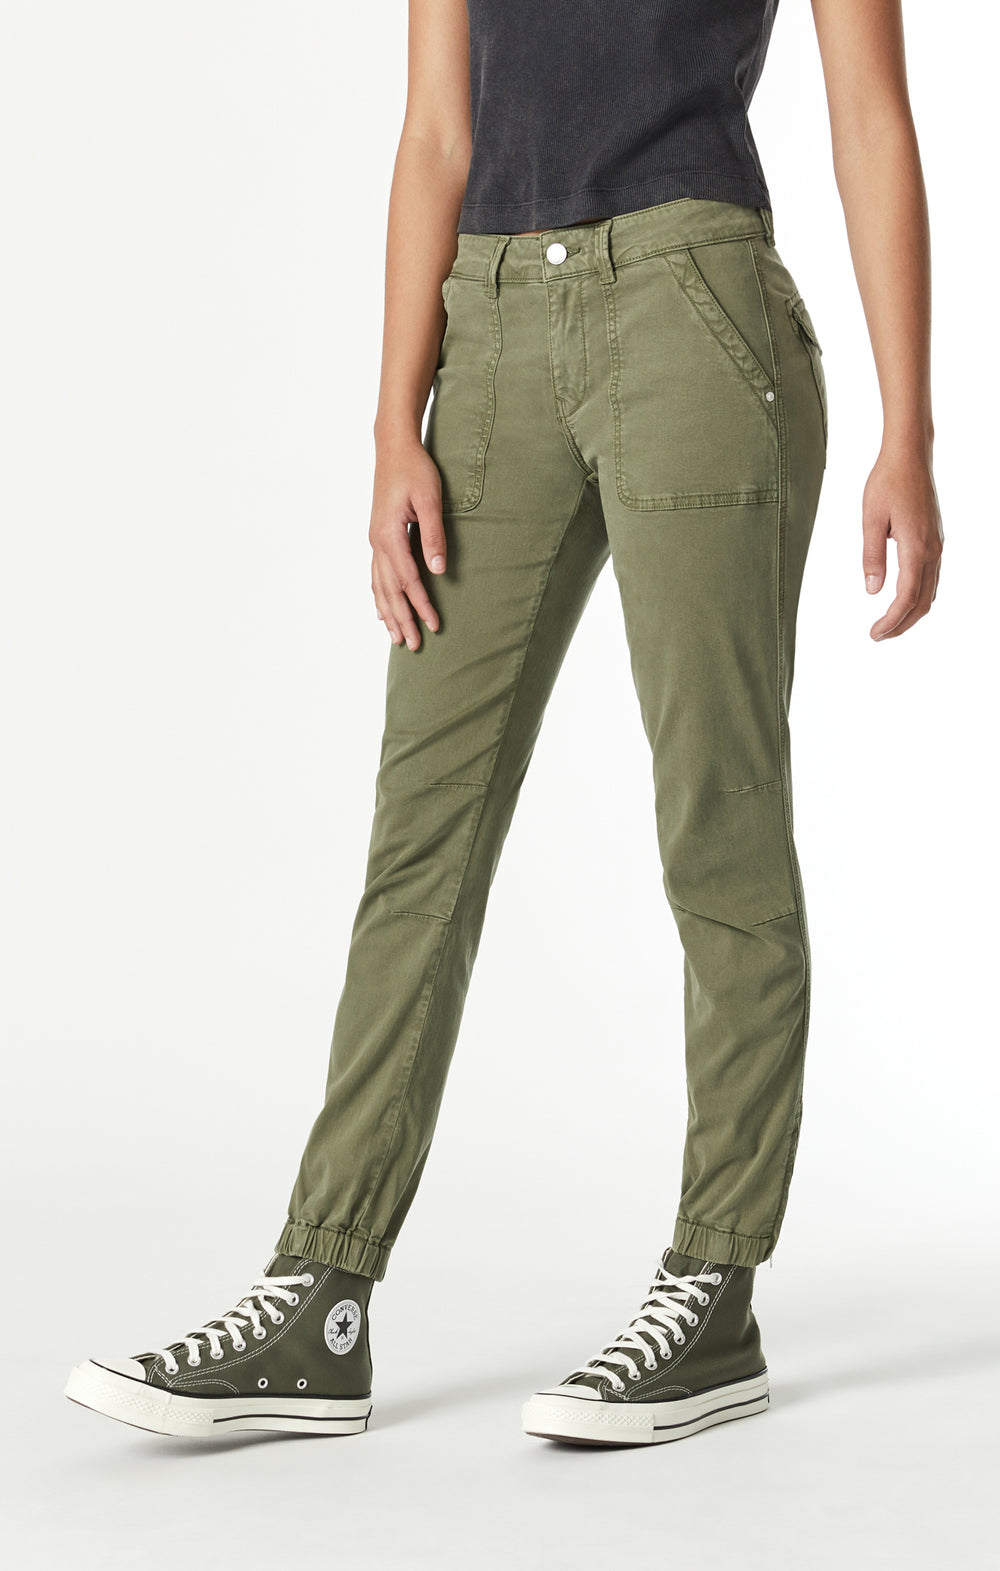 Mavi Jeans Spring 2023 women's casual slim fit cropped green cotton cargo pant - side